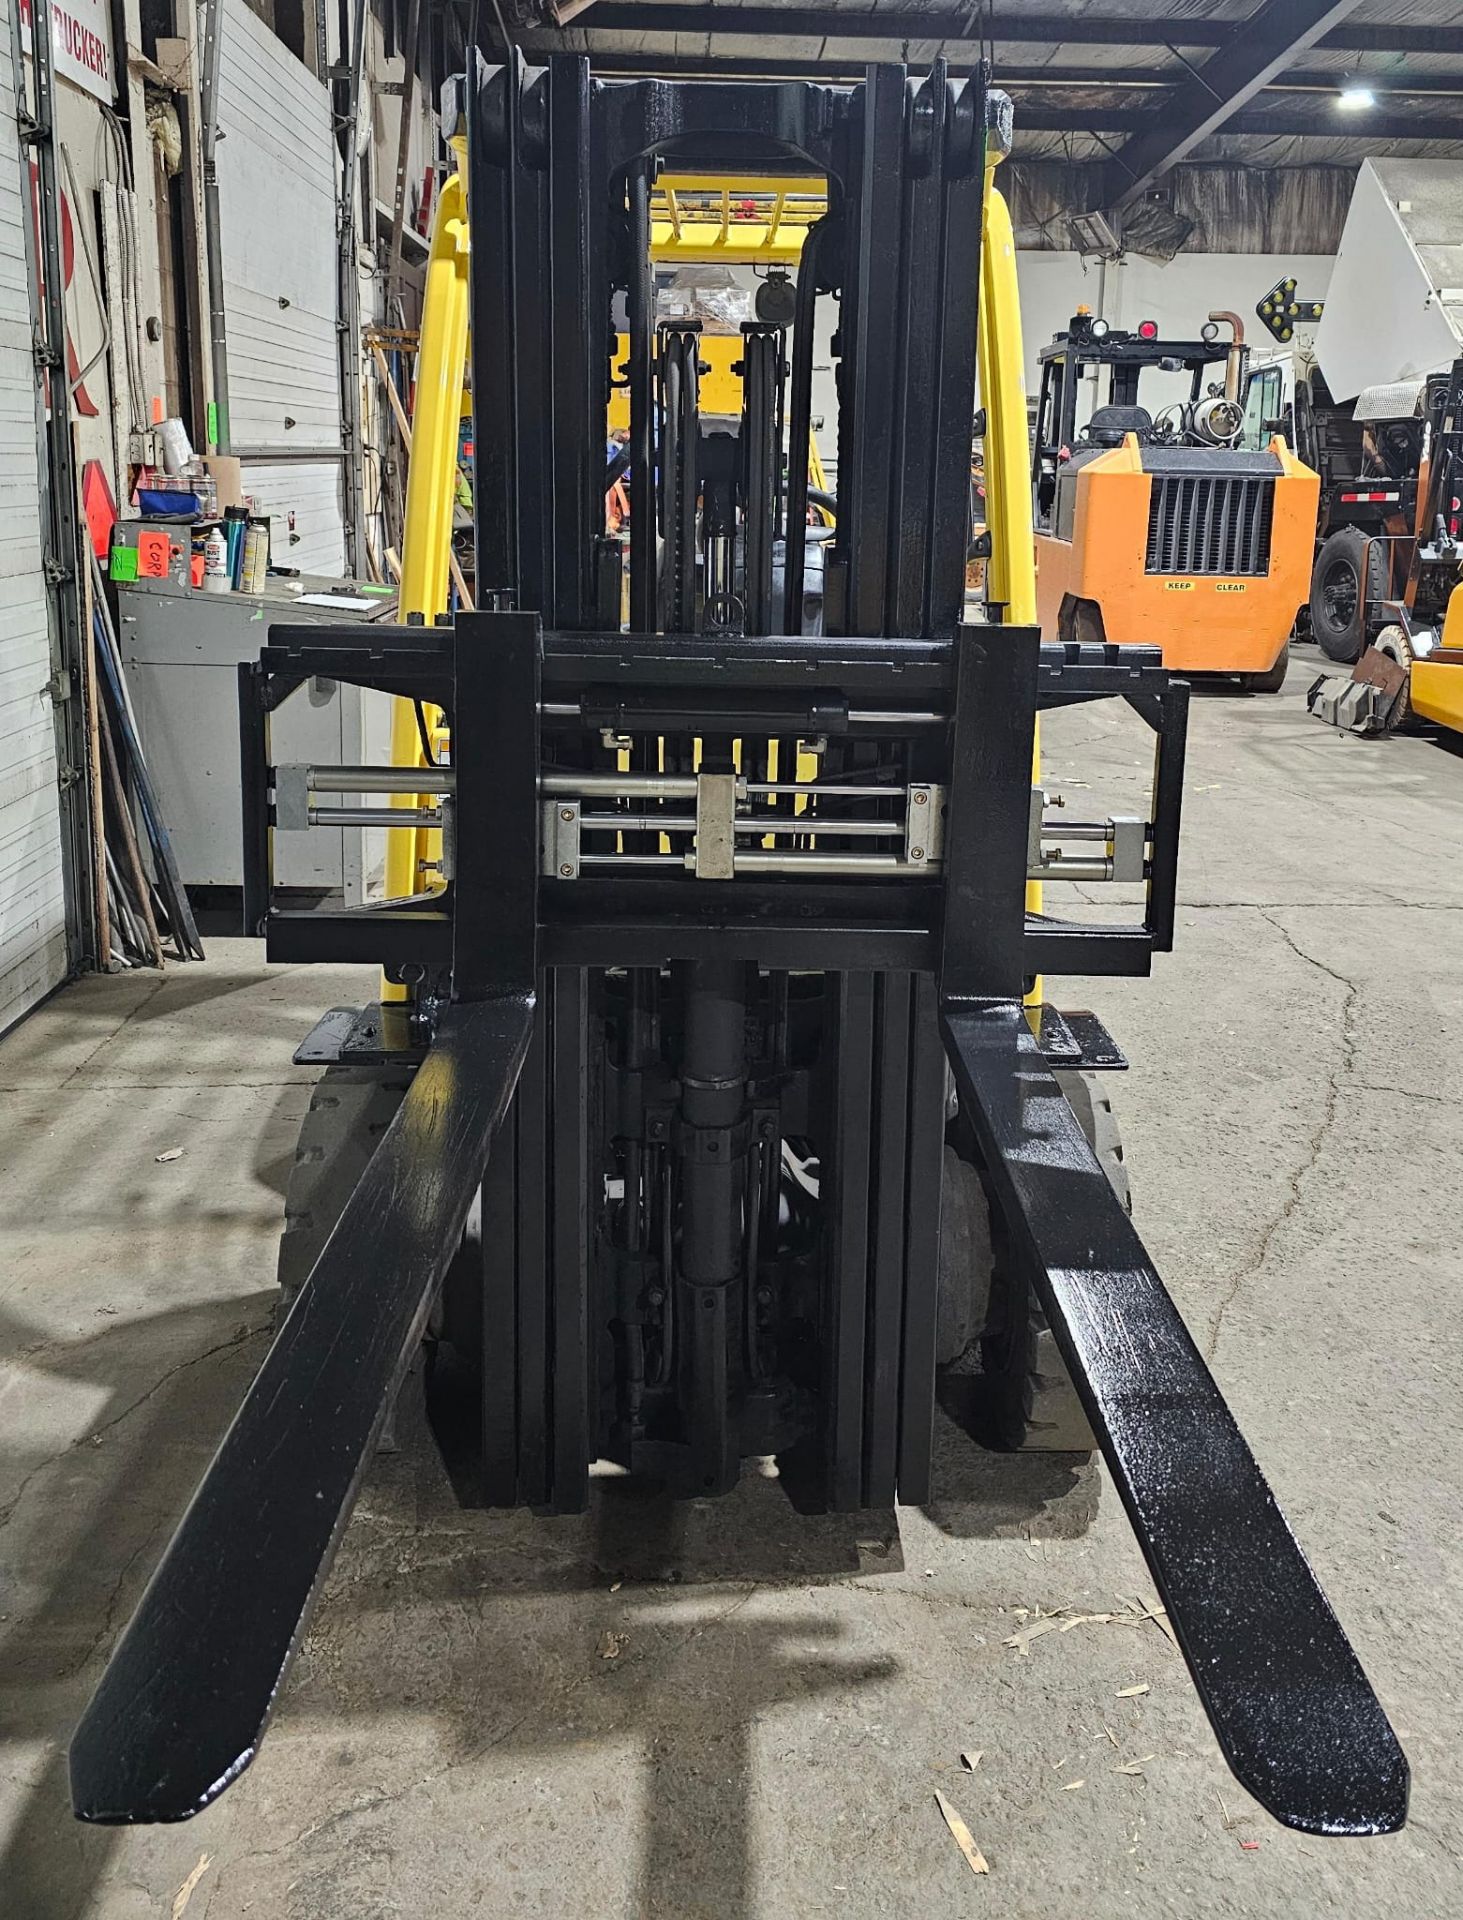 2010 Hyster 5,000lbs Capacity LPG (Propane) OUTDOOR Forklift sideshift positioner 3-STAGE MAST 189" - Image 5 of 5